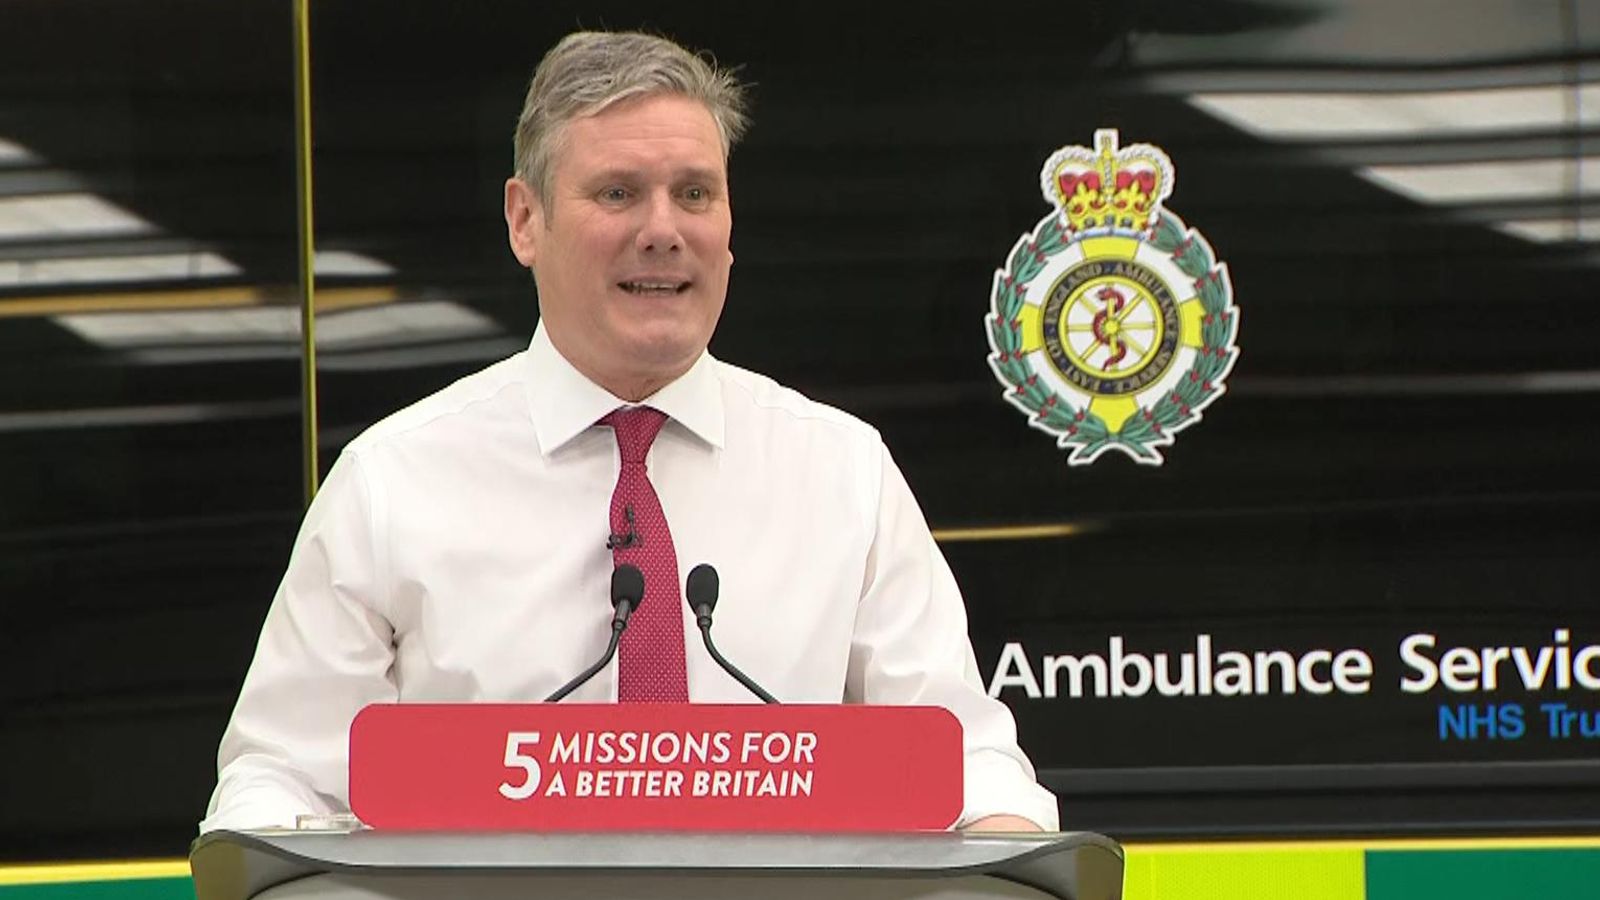 'It's not all about money': Starmer questioned on how 'five missions' plan for NHS will be funded